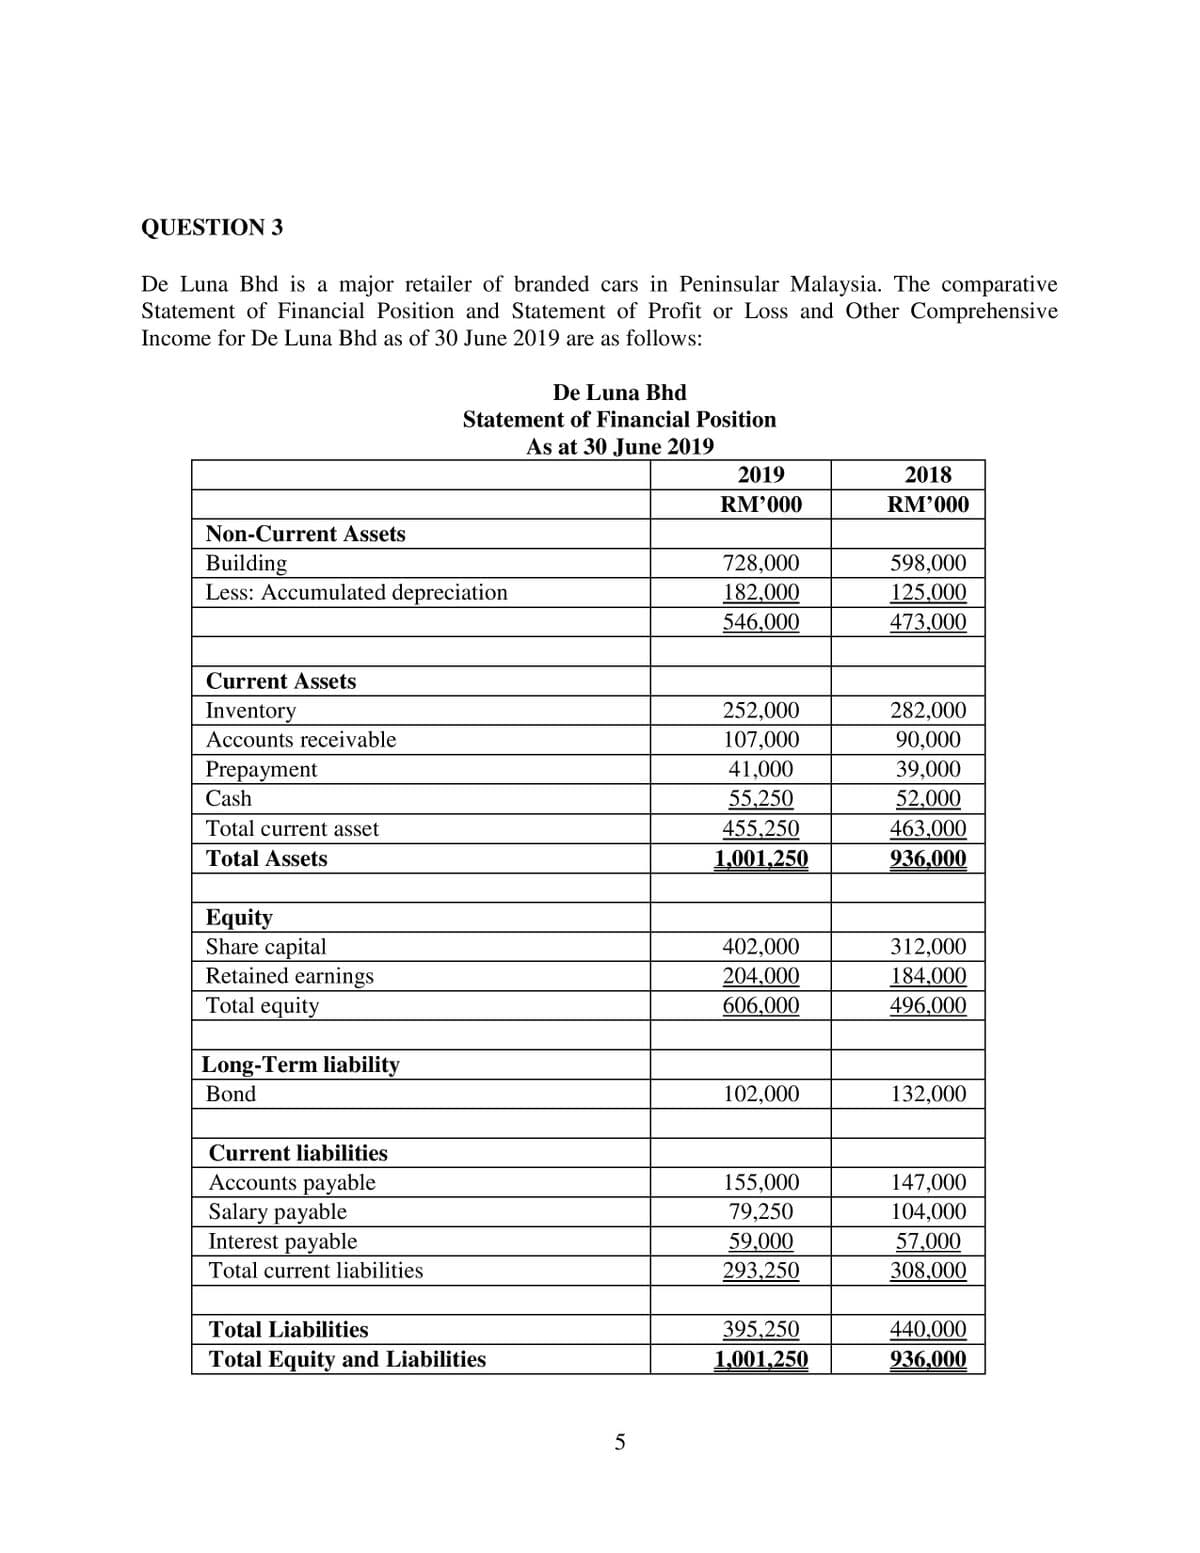 QUESTION 3
De Luna Bhd is a major retailer of branded cars in Peninsular Malaysia. The comparative
Statement of Financial Position and Statement of Profit or Loss and Other Comprehensive
Income for De Luna Bhd as of 30 June 2019 are as follows:
De Luna Bhd
Statement of Financial Position
As at 30 June 2019
2019
2018
RM'000
RM'000
Non-Current Assets
728,000
Building
Less: Accumulated depreciation
598,000
182,000
546,000
125,000
473,000
Current Assets
Inventory
252,000
282,000
Accounts receivable
107,000
90,000
Prepayment
41,000
39,000
55,250
455,250
Cash
52,000
Total current asset
463,000
936,000
Total Assets
1,001,250
Equity
Share capital
Retained earnings
Total equity
402,000
204,000
312,000
184,000
496.000
606,000
Long-Term liability
Bond
102,000
132,000
Current liabilities
Accounts payable
Salary payable
Interest payable
155,000
79,250
147,000
104,000
59,000
293,250
57,000
Total current liabilities
308,000
Total Liabilities
395,250
440,000
Total Equity and Liabilities
1,001,250
936,000
5
